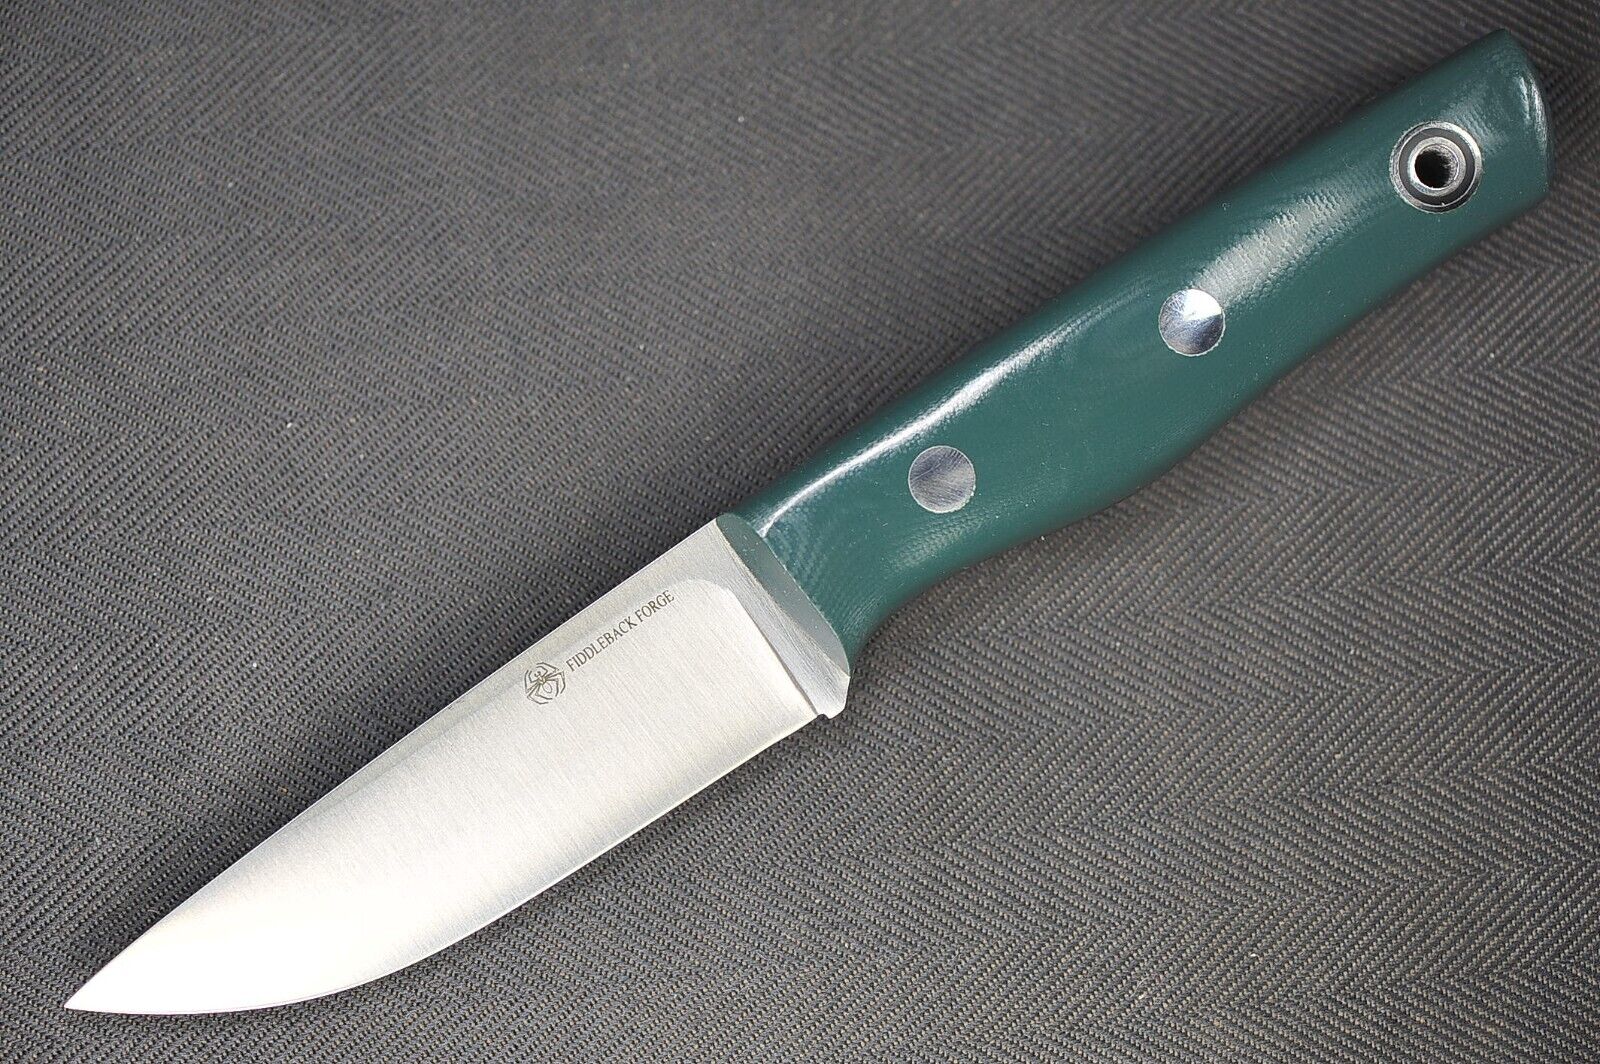 2010 BRKT/Fiddleback Forge Recluse .16” A2 Convexed Blade, Full Green G10 Handle